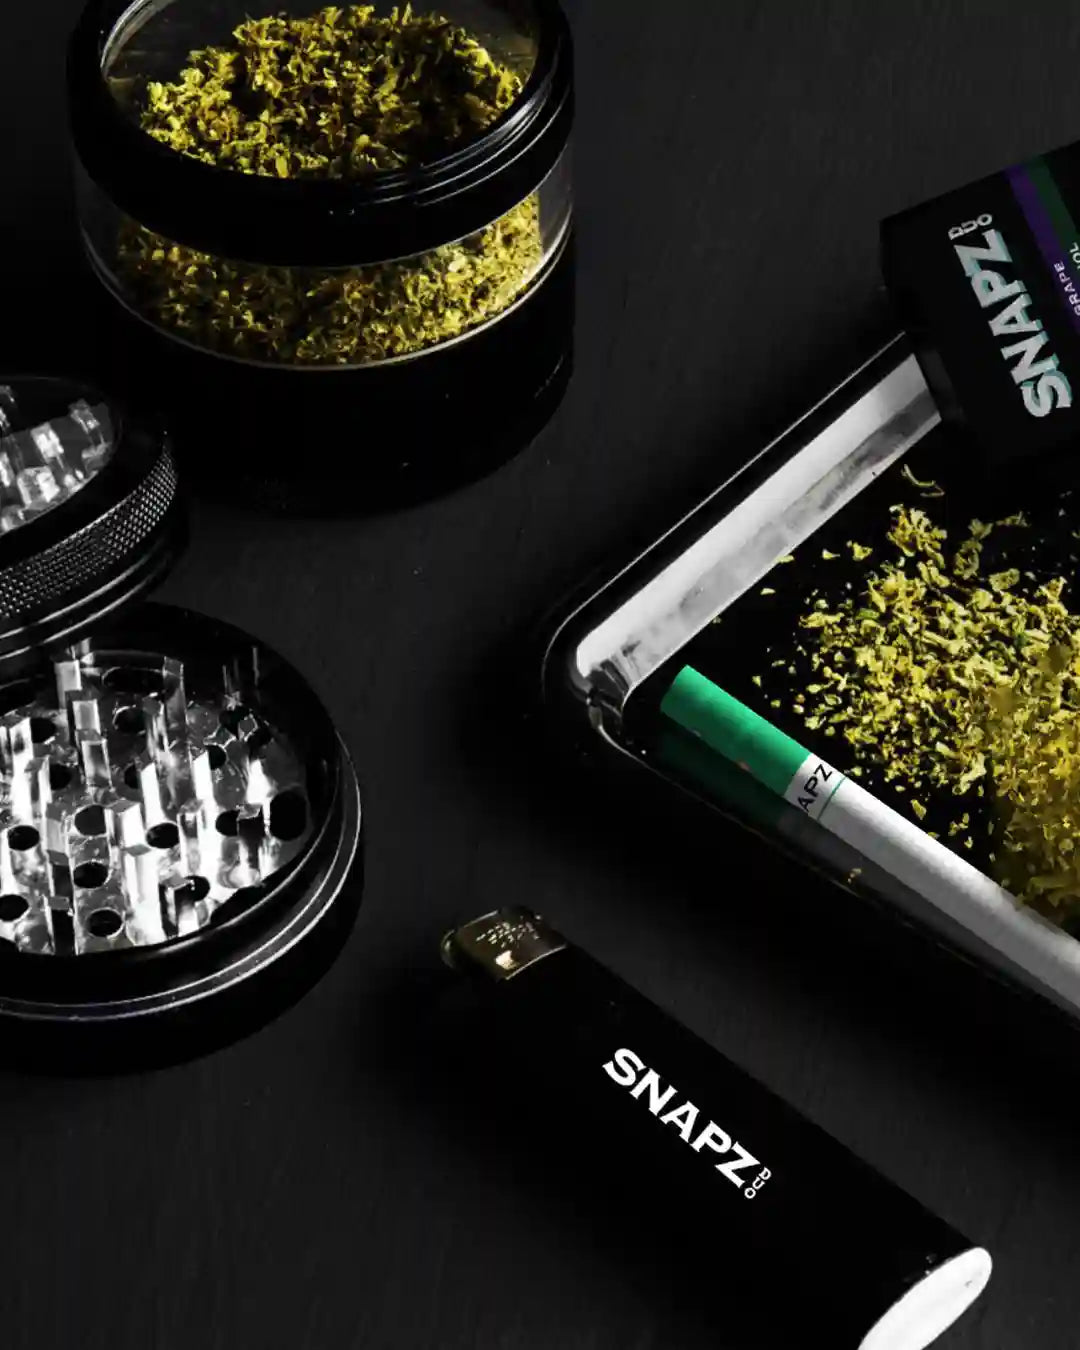 Snapz Duo is a great way to experience CBD.